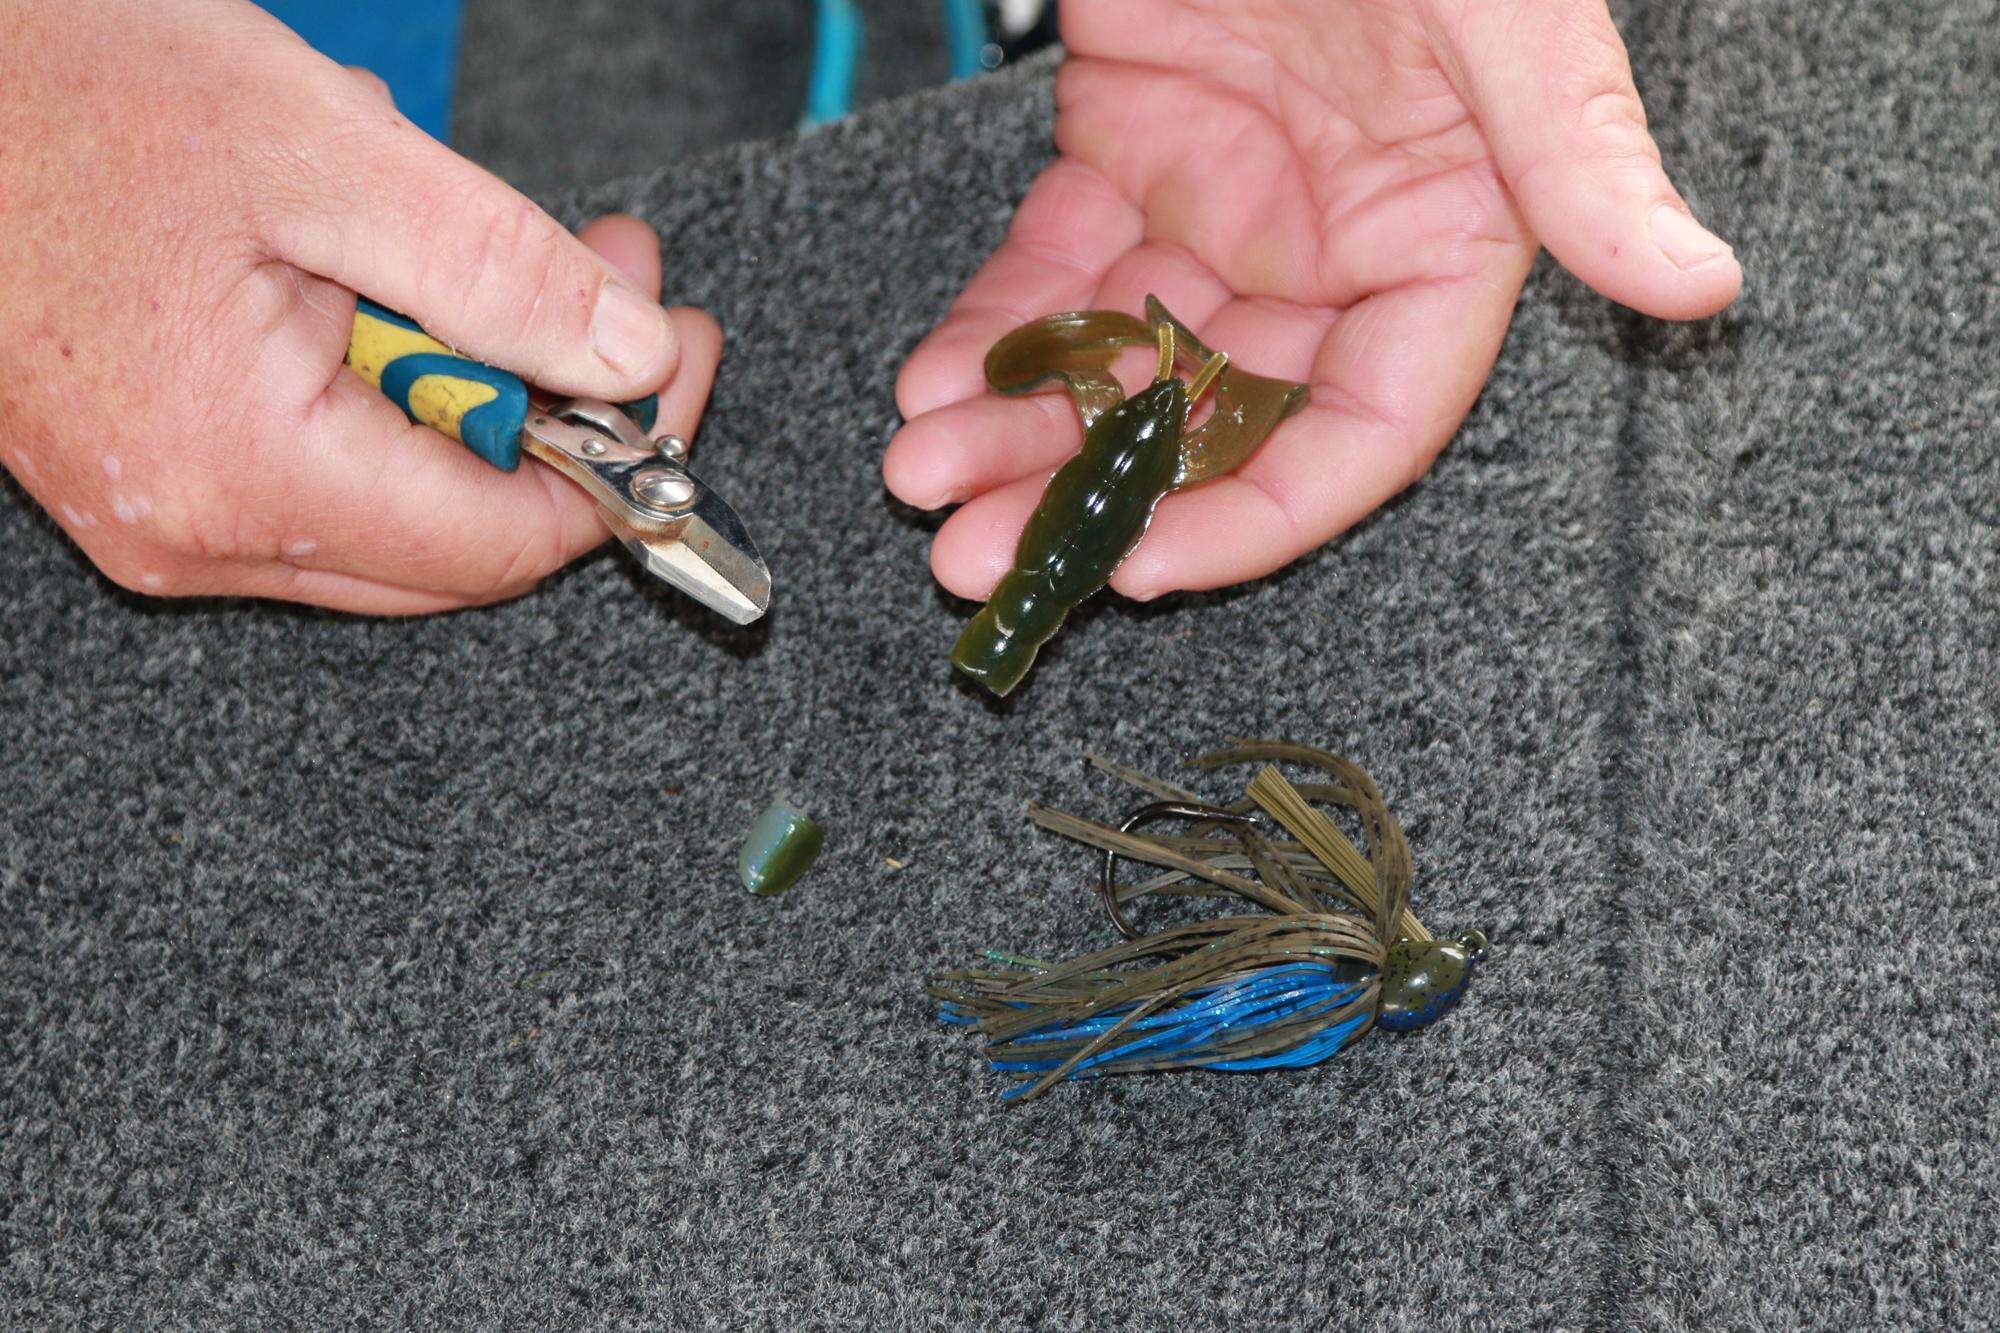 Usually, removing the first segment of a Rage Craw yields the right fit that he wants for his jig profile.